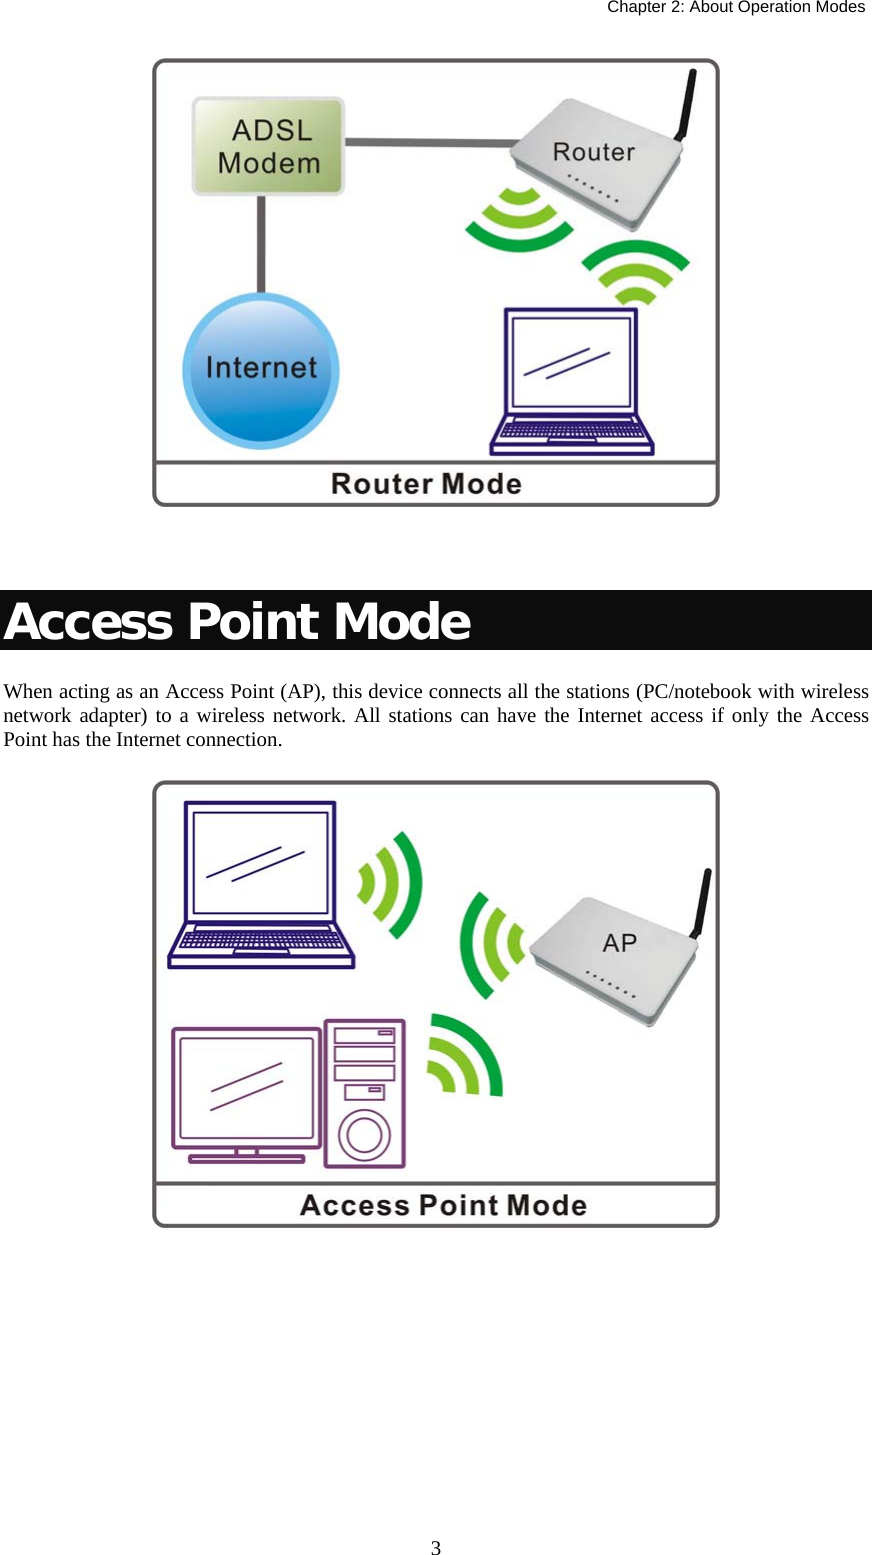   Chapter 2: About Operation Modes  3  Access Point Mode When acting as an Access Point (AP), this device connects all the stations (PC/notebook with wireless network adapter) to a wireless network. All stations can have the Internet access if only the Access Point has the Internet connection.       